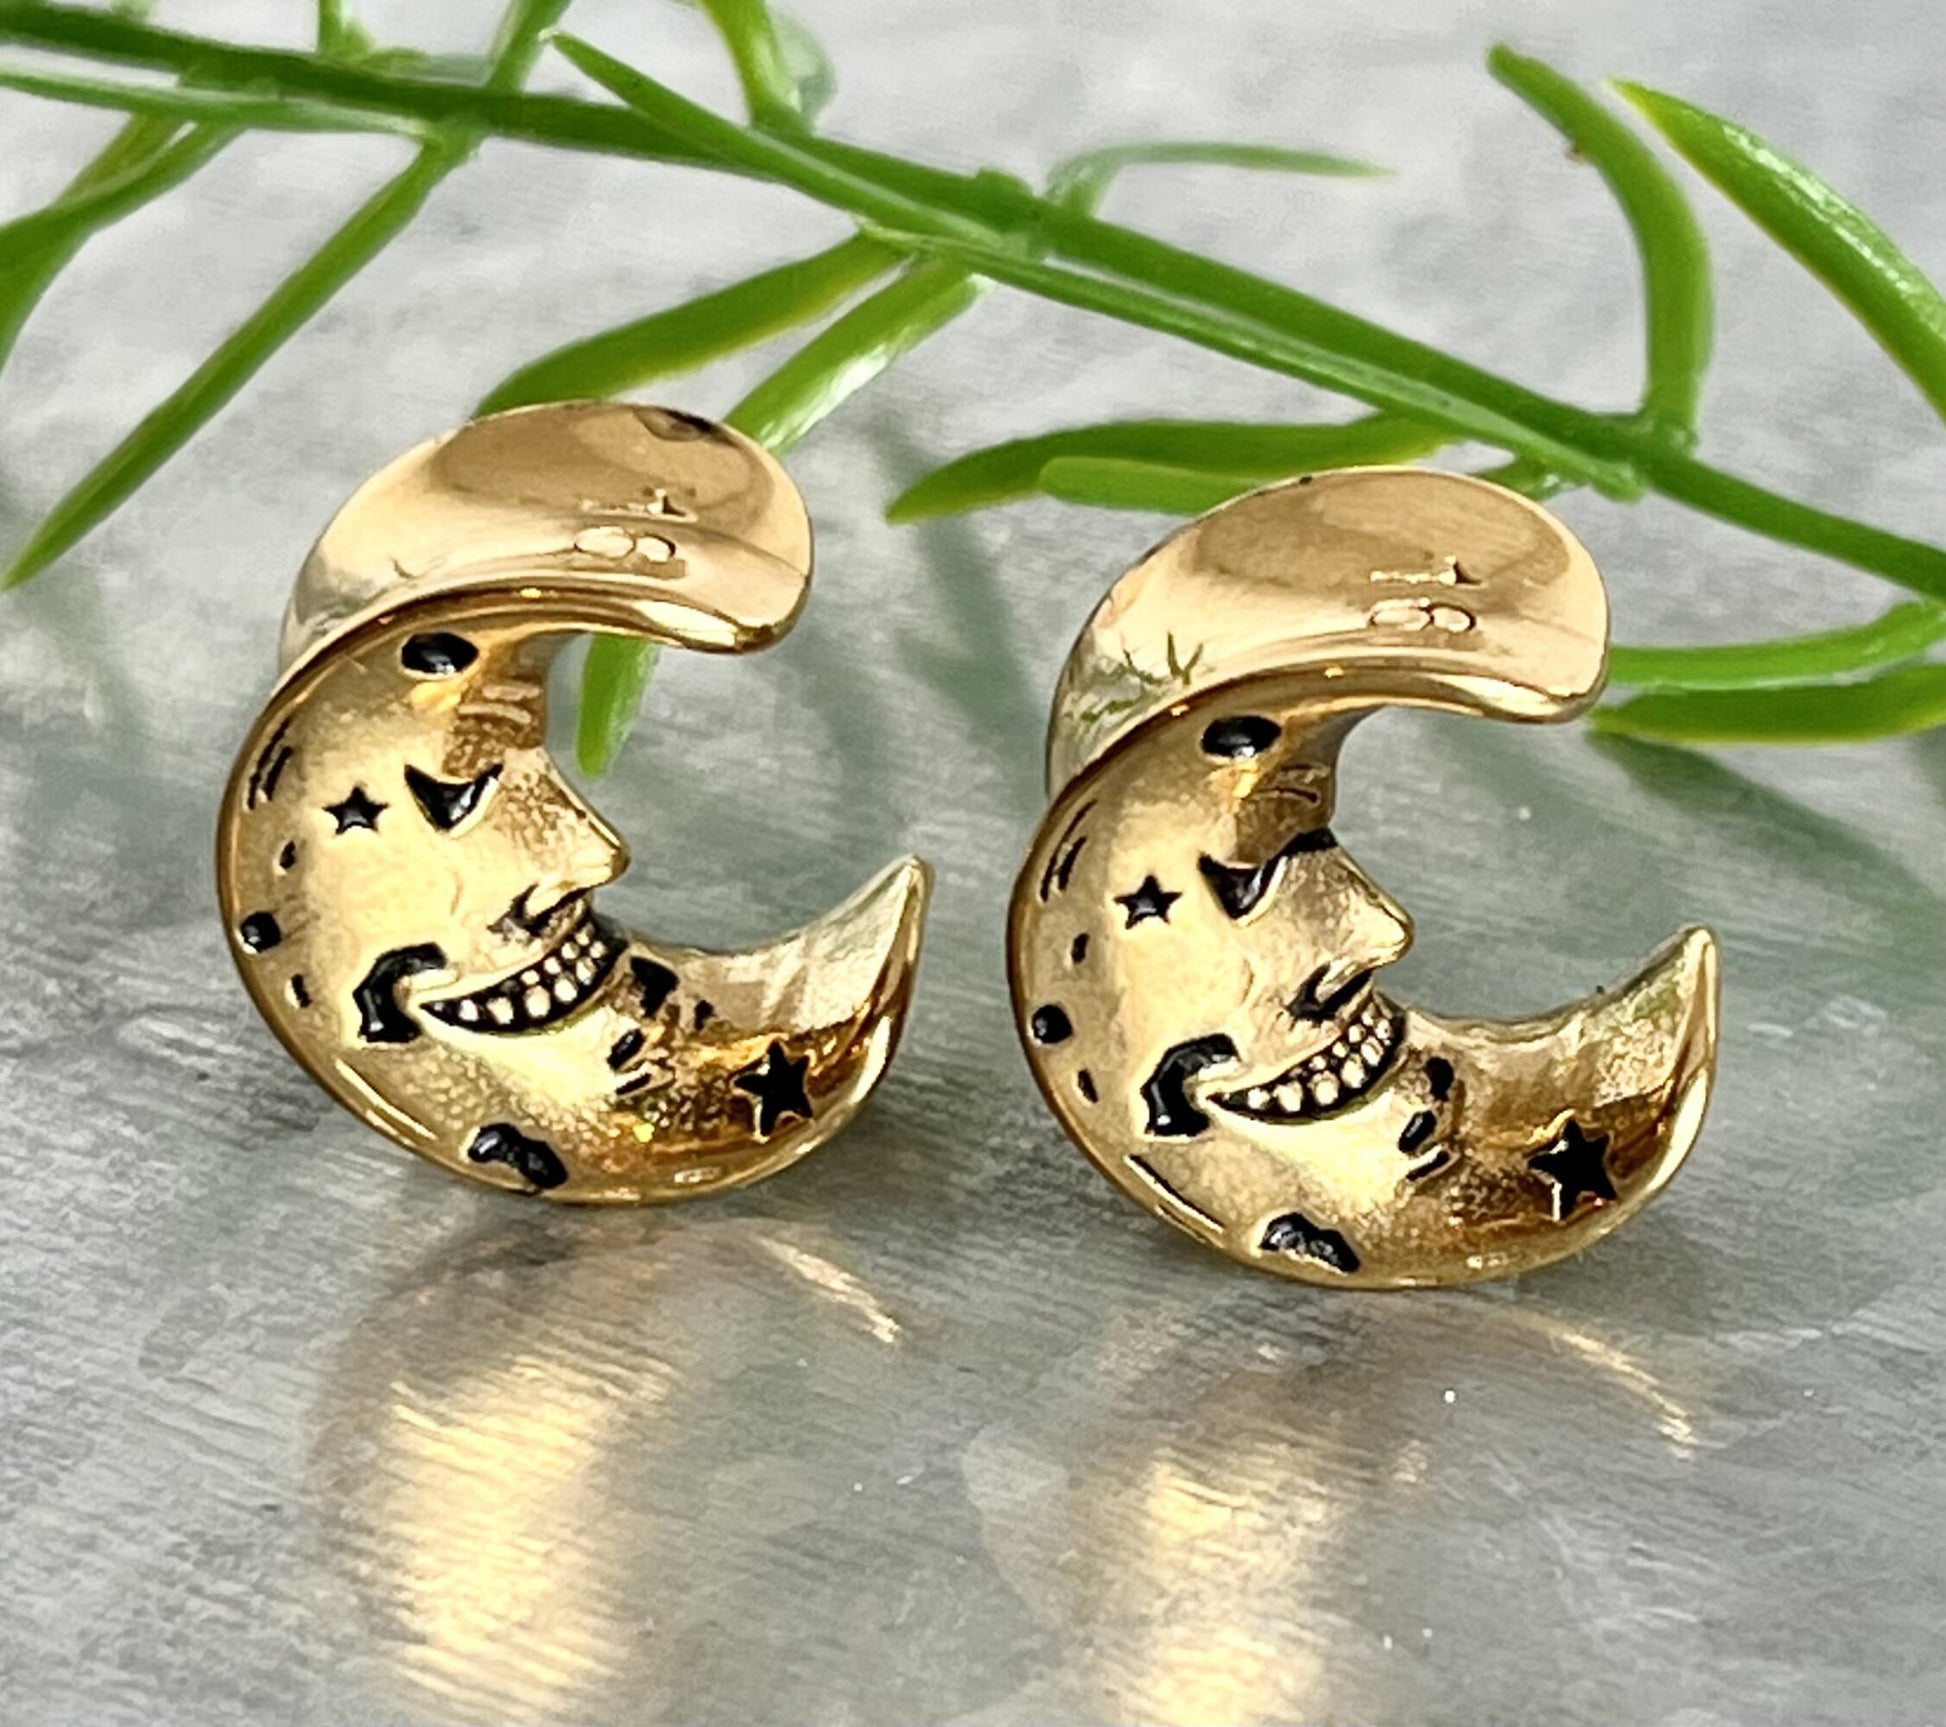 PAIR of Unique Face of the Moon Saddle Surgical Steel Ear Spreaders Hanger-Tunnels/Plugs - Gauges 0g (8mm) thru 16mm available!